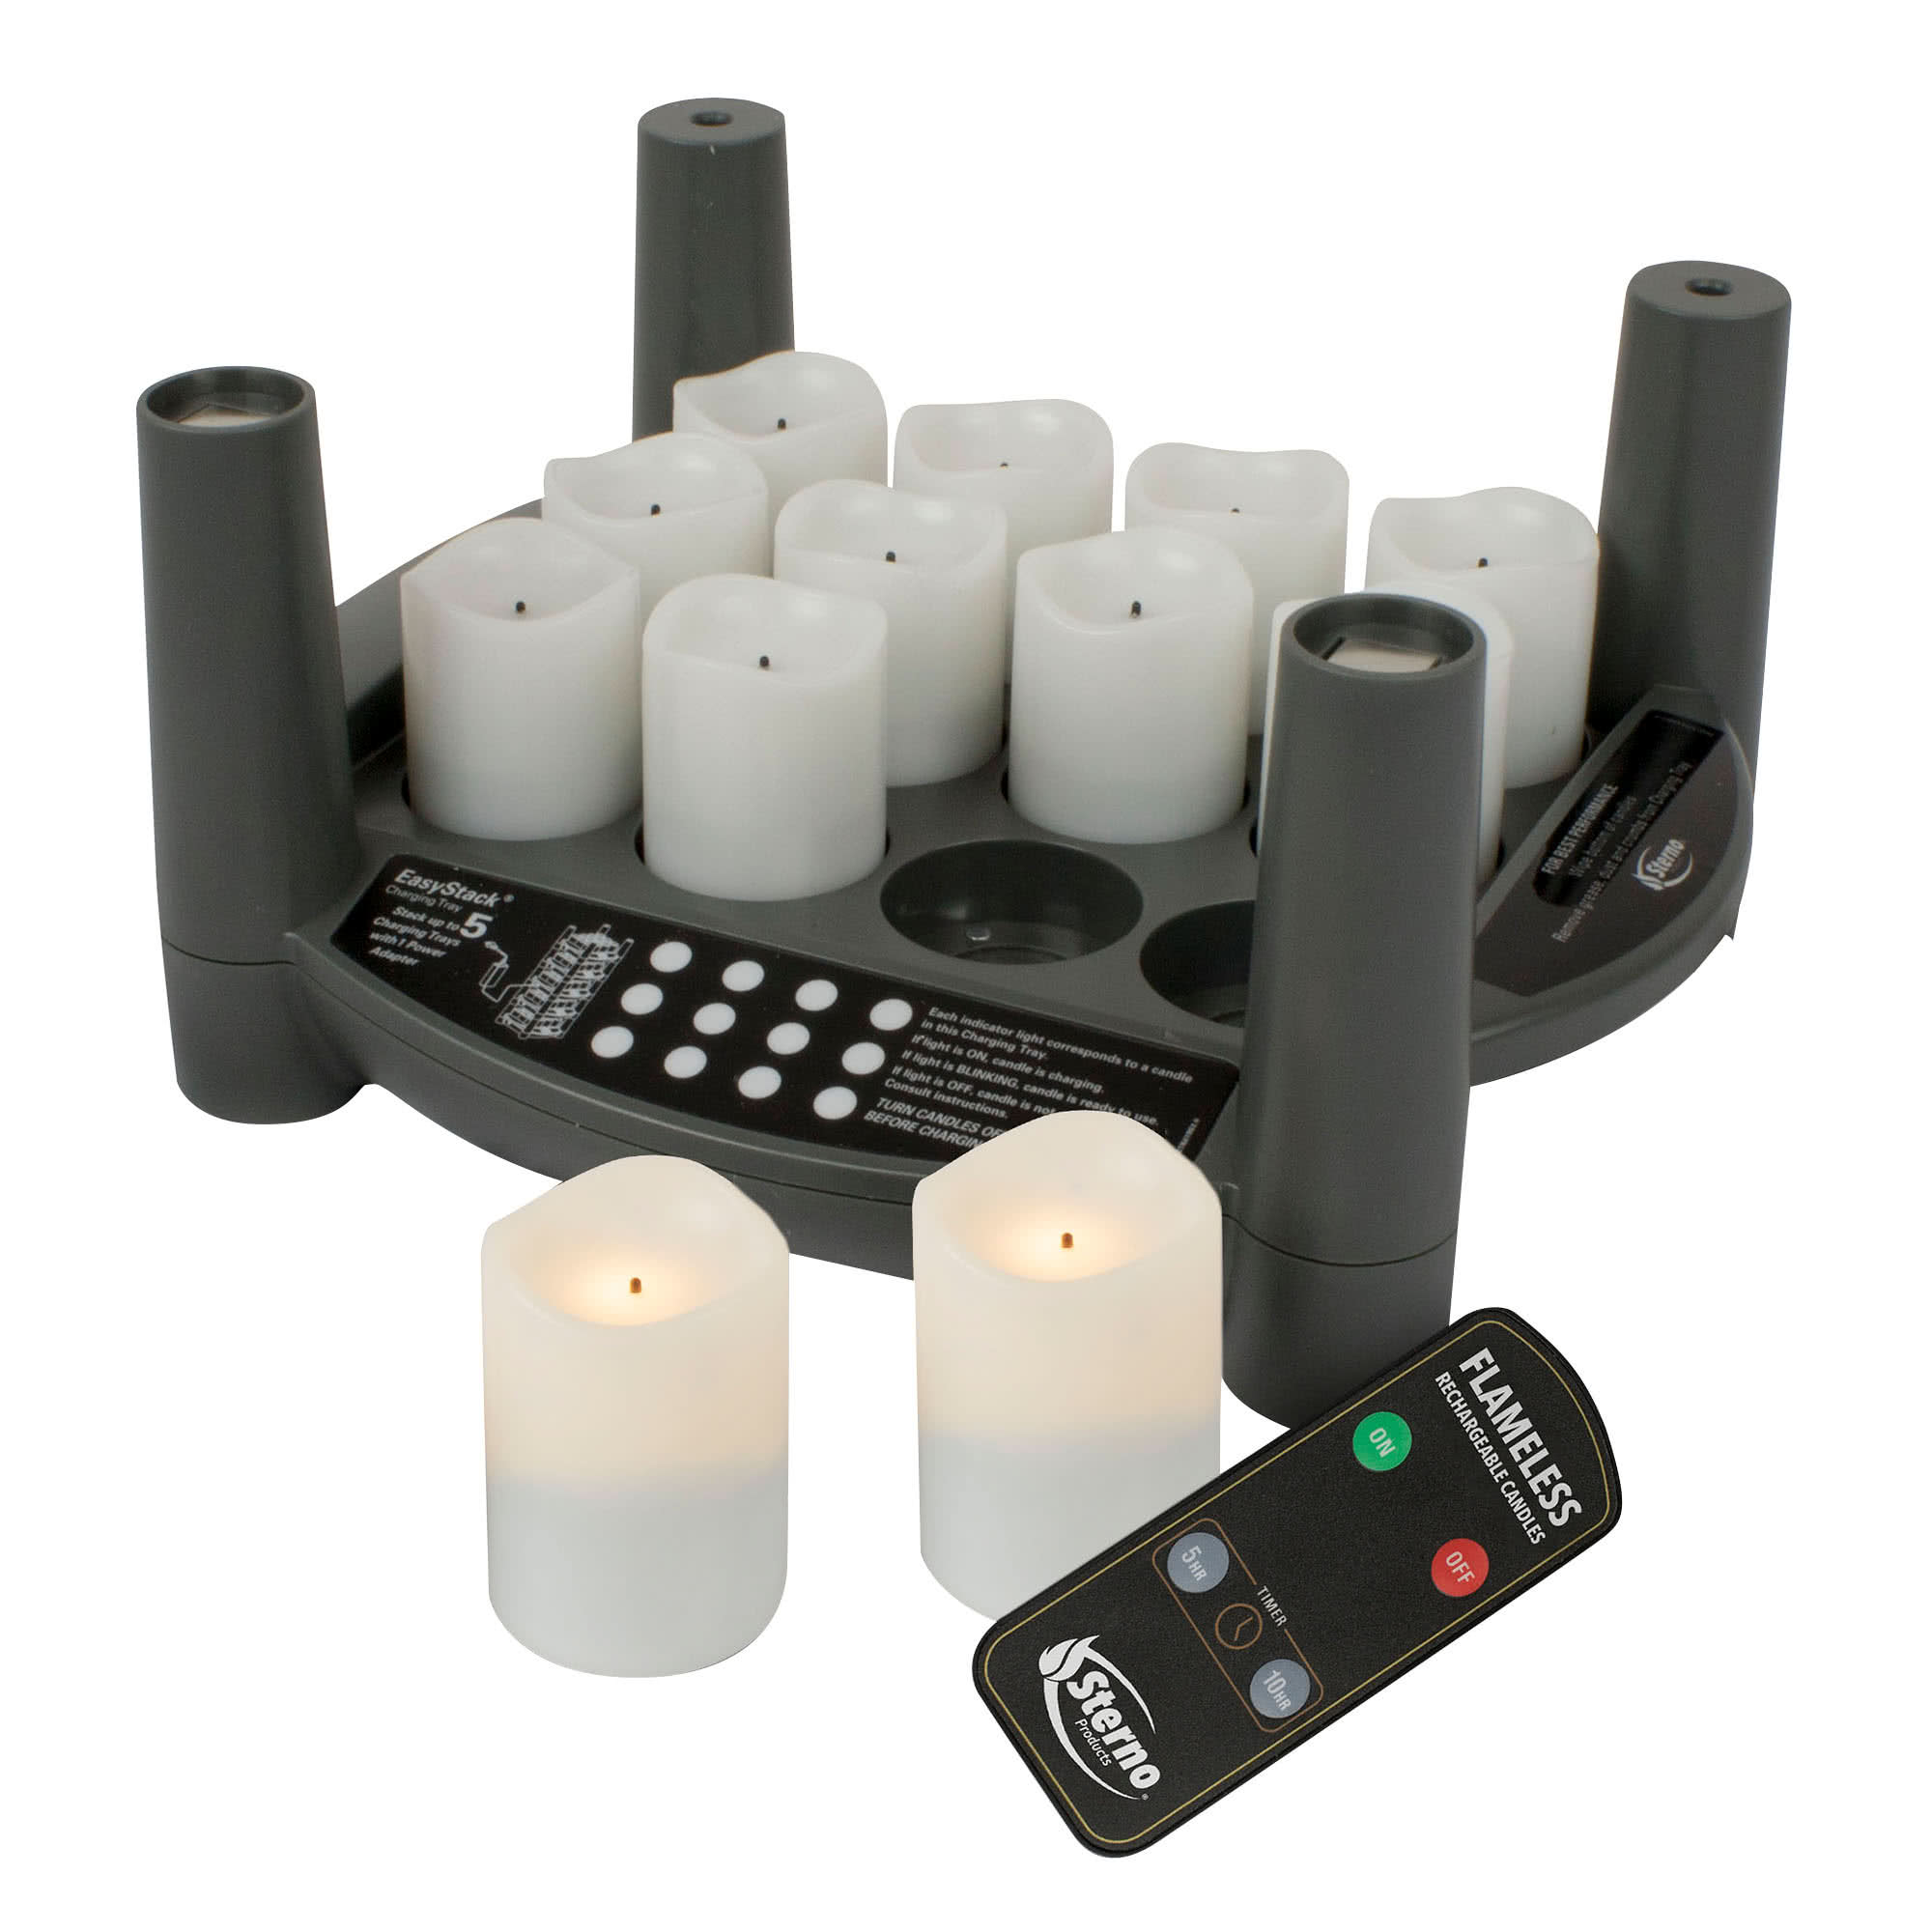 12PC WARM WHITE RECHARGEBALE
FLAMELESS VOTIVE SET
W/CHARGING BASE &amp; TIMER WITH
REMOTE EACH